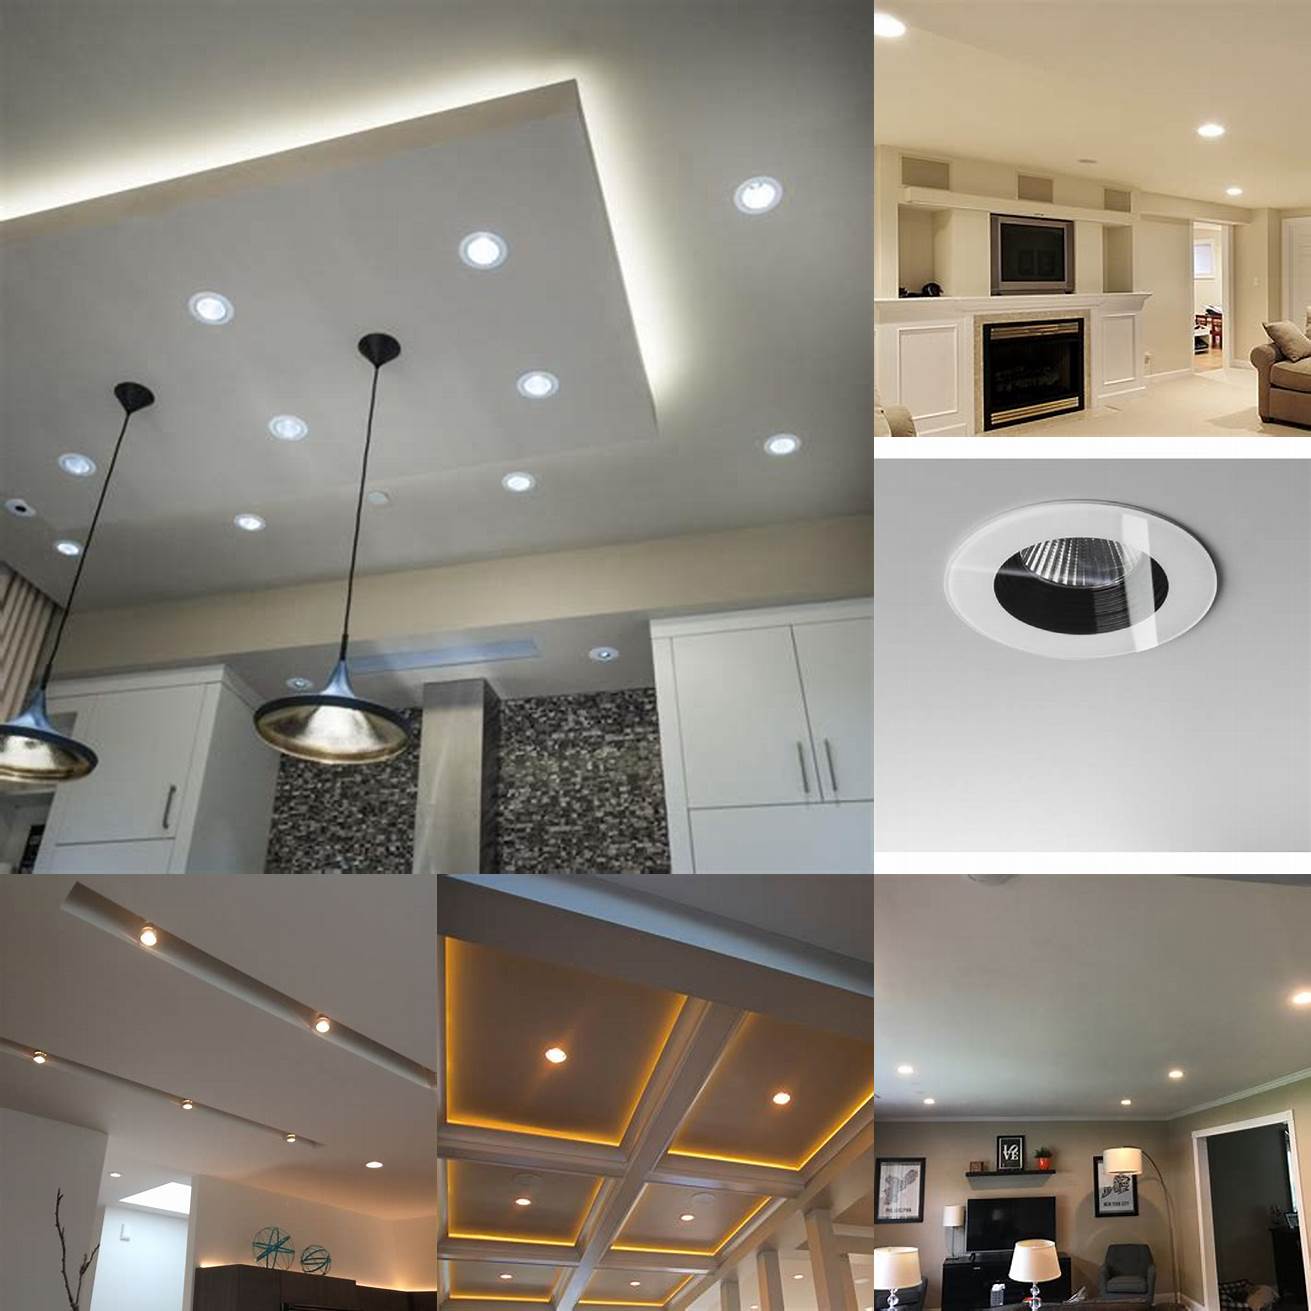 Recessed lighting provides a clean modern look and is great for general lighting